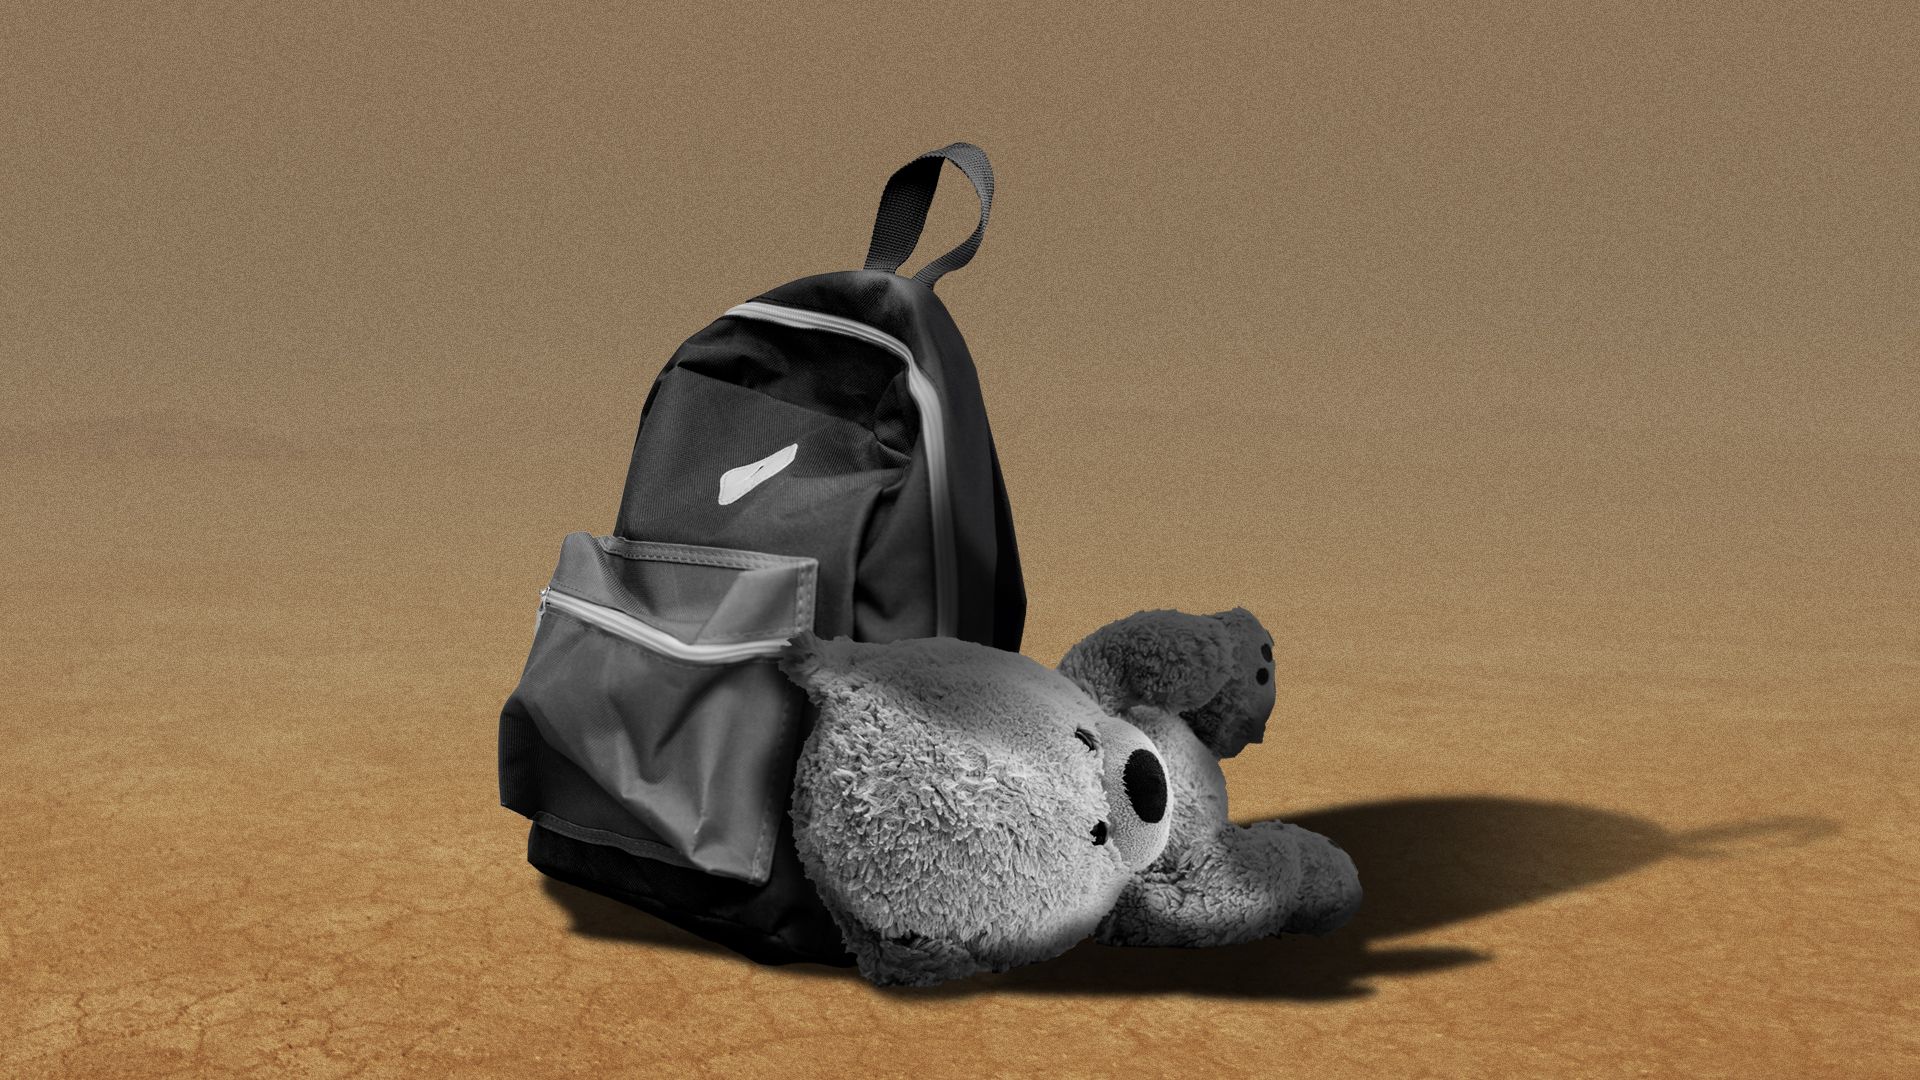 Illustration of a backpack and teddy bear in a desert